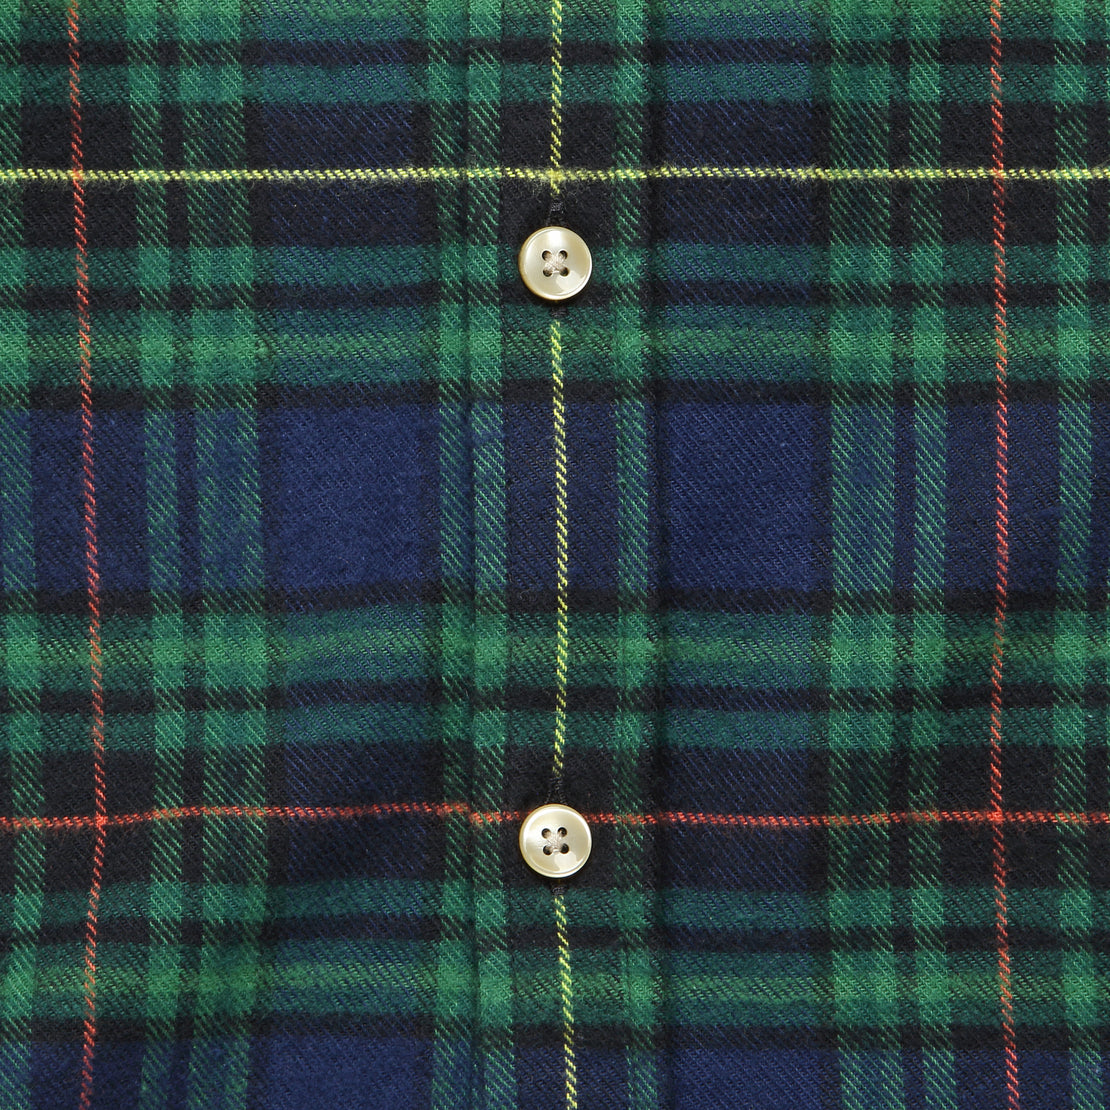 Orts Shirt - Green - Portuguese Flannel - STAG Provisions - Tops - L/S Woven - Plaid